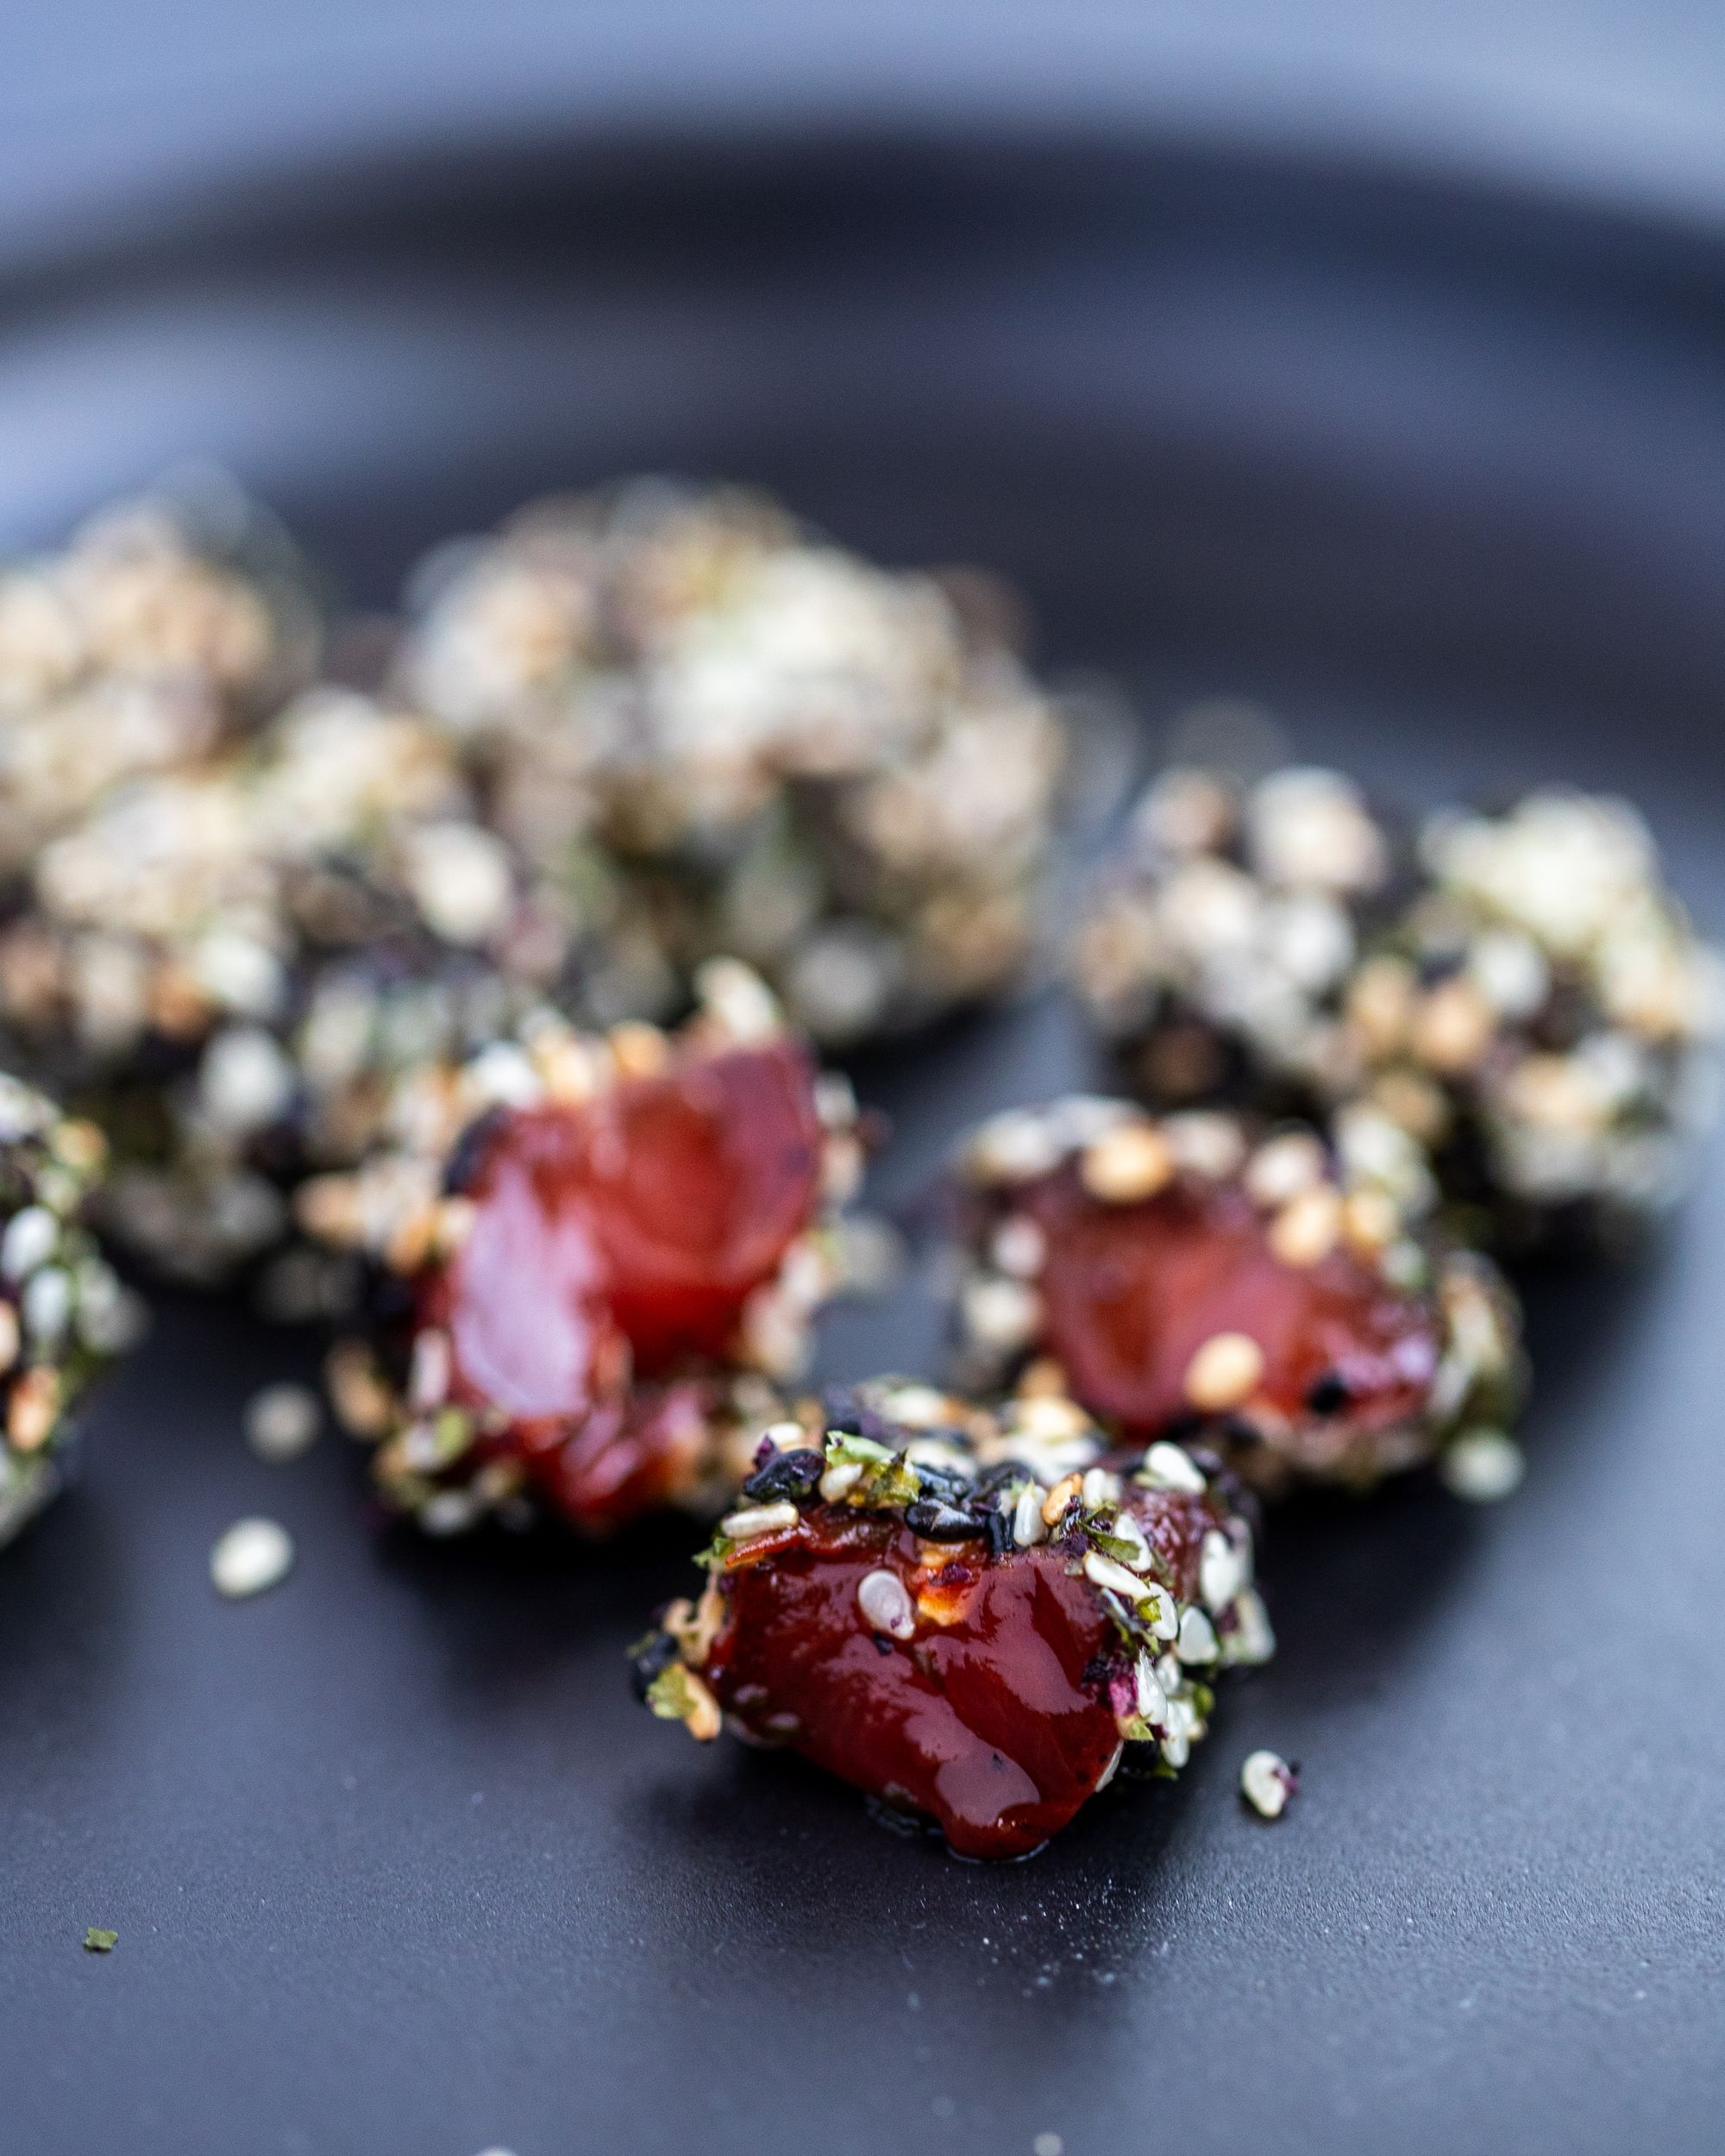 Watermelon tuna pieces covered in sesame seed and nori flakes